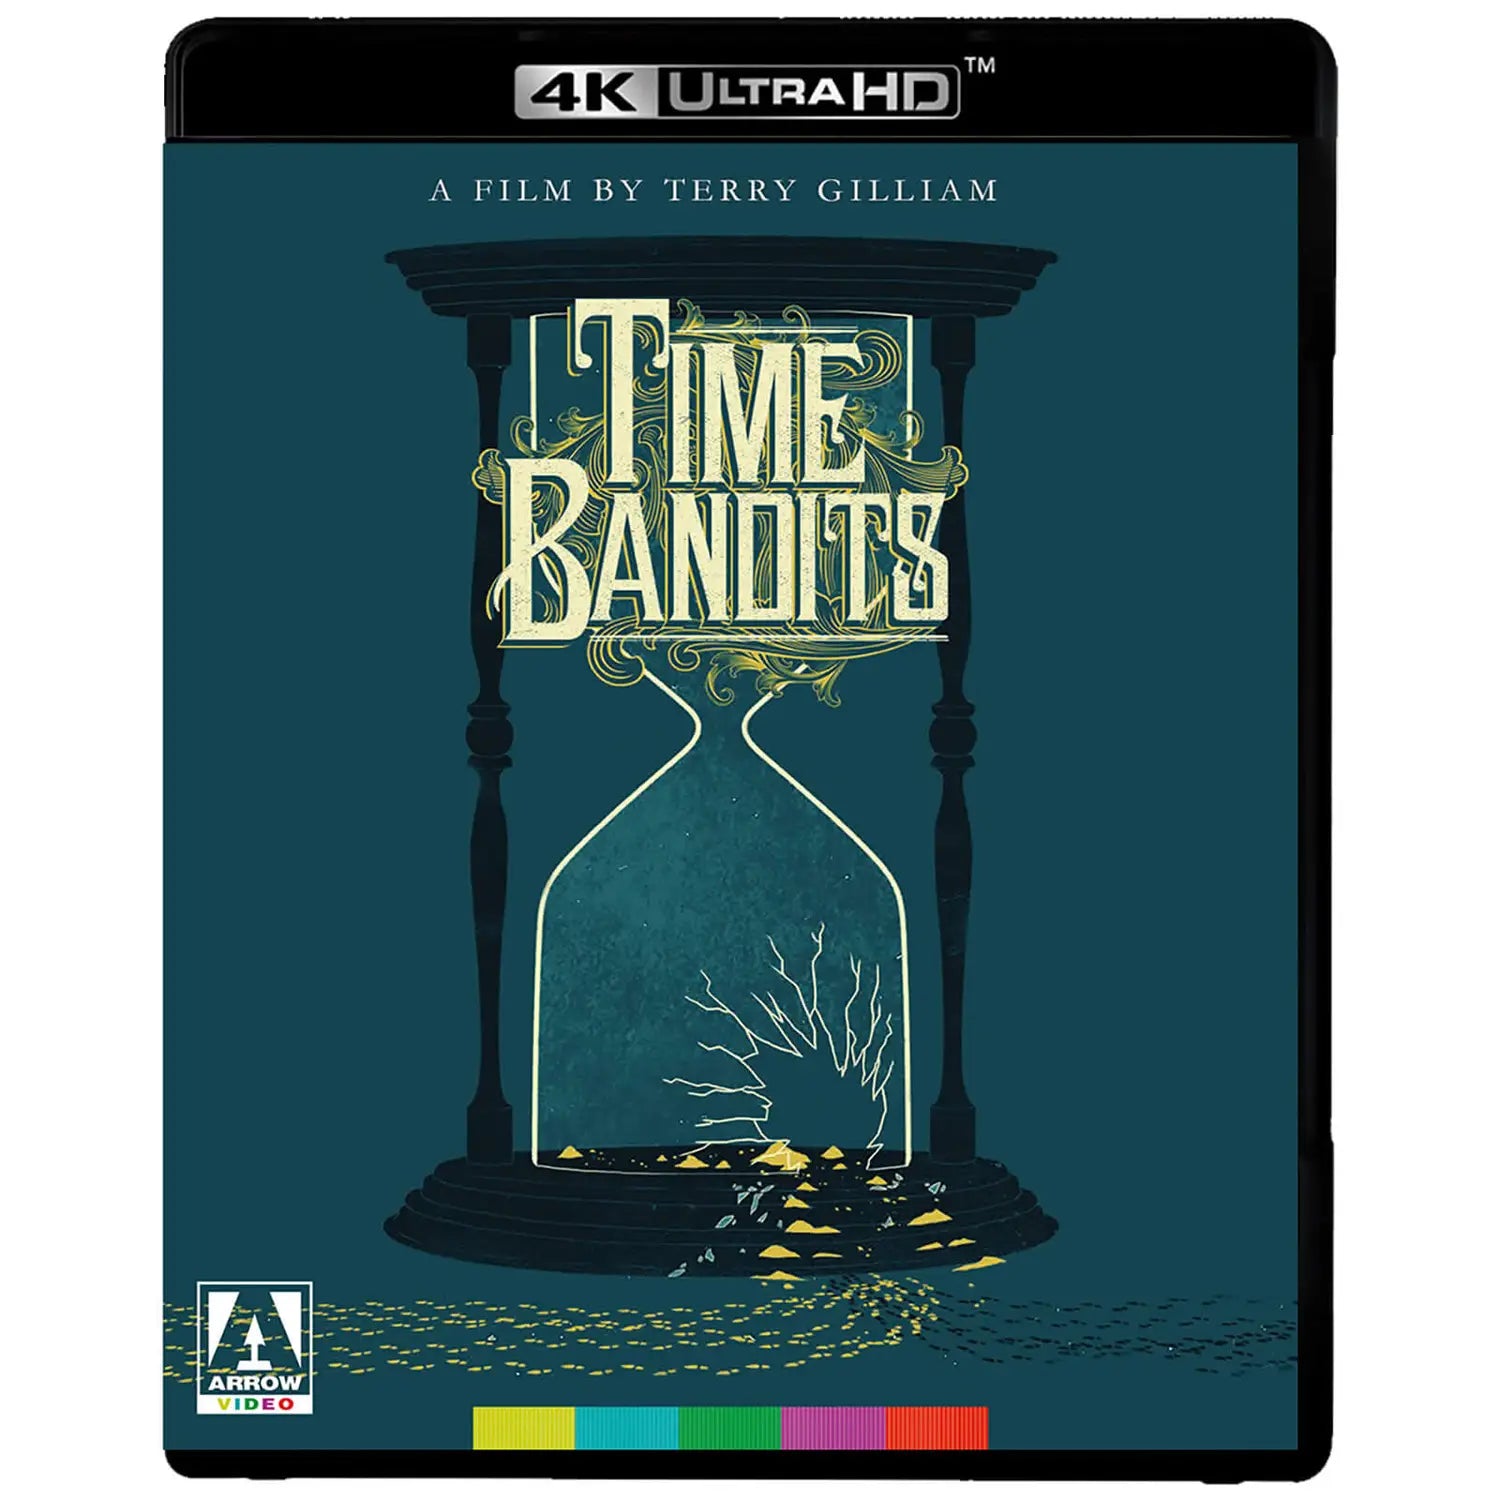 Time Bandits Limited Edition 4K UHD with Slipcover (Arrow UK/Region Fr –  The Atomic Movie Store